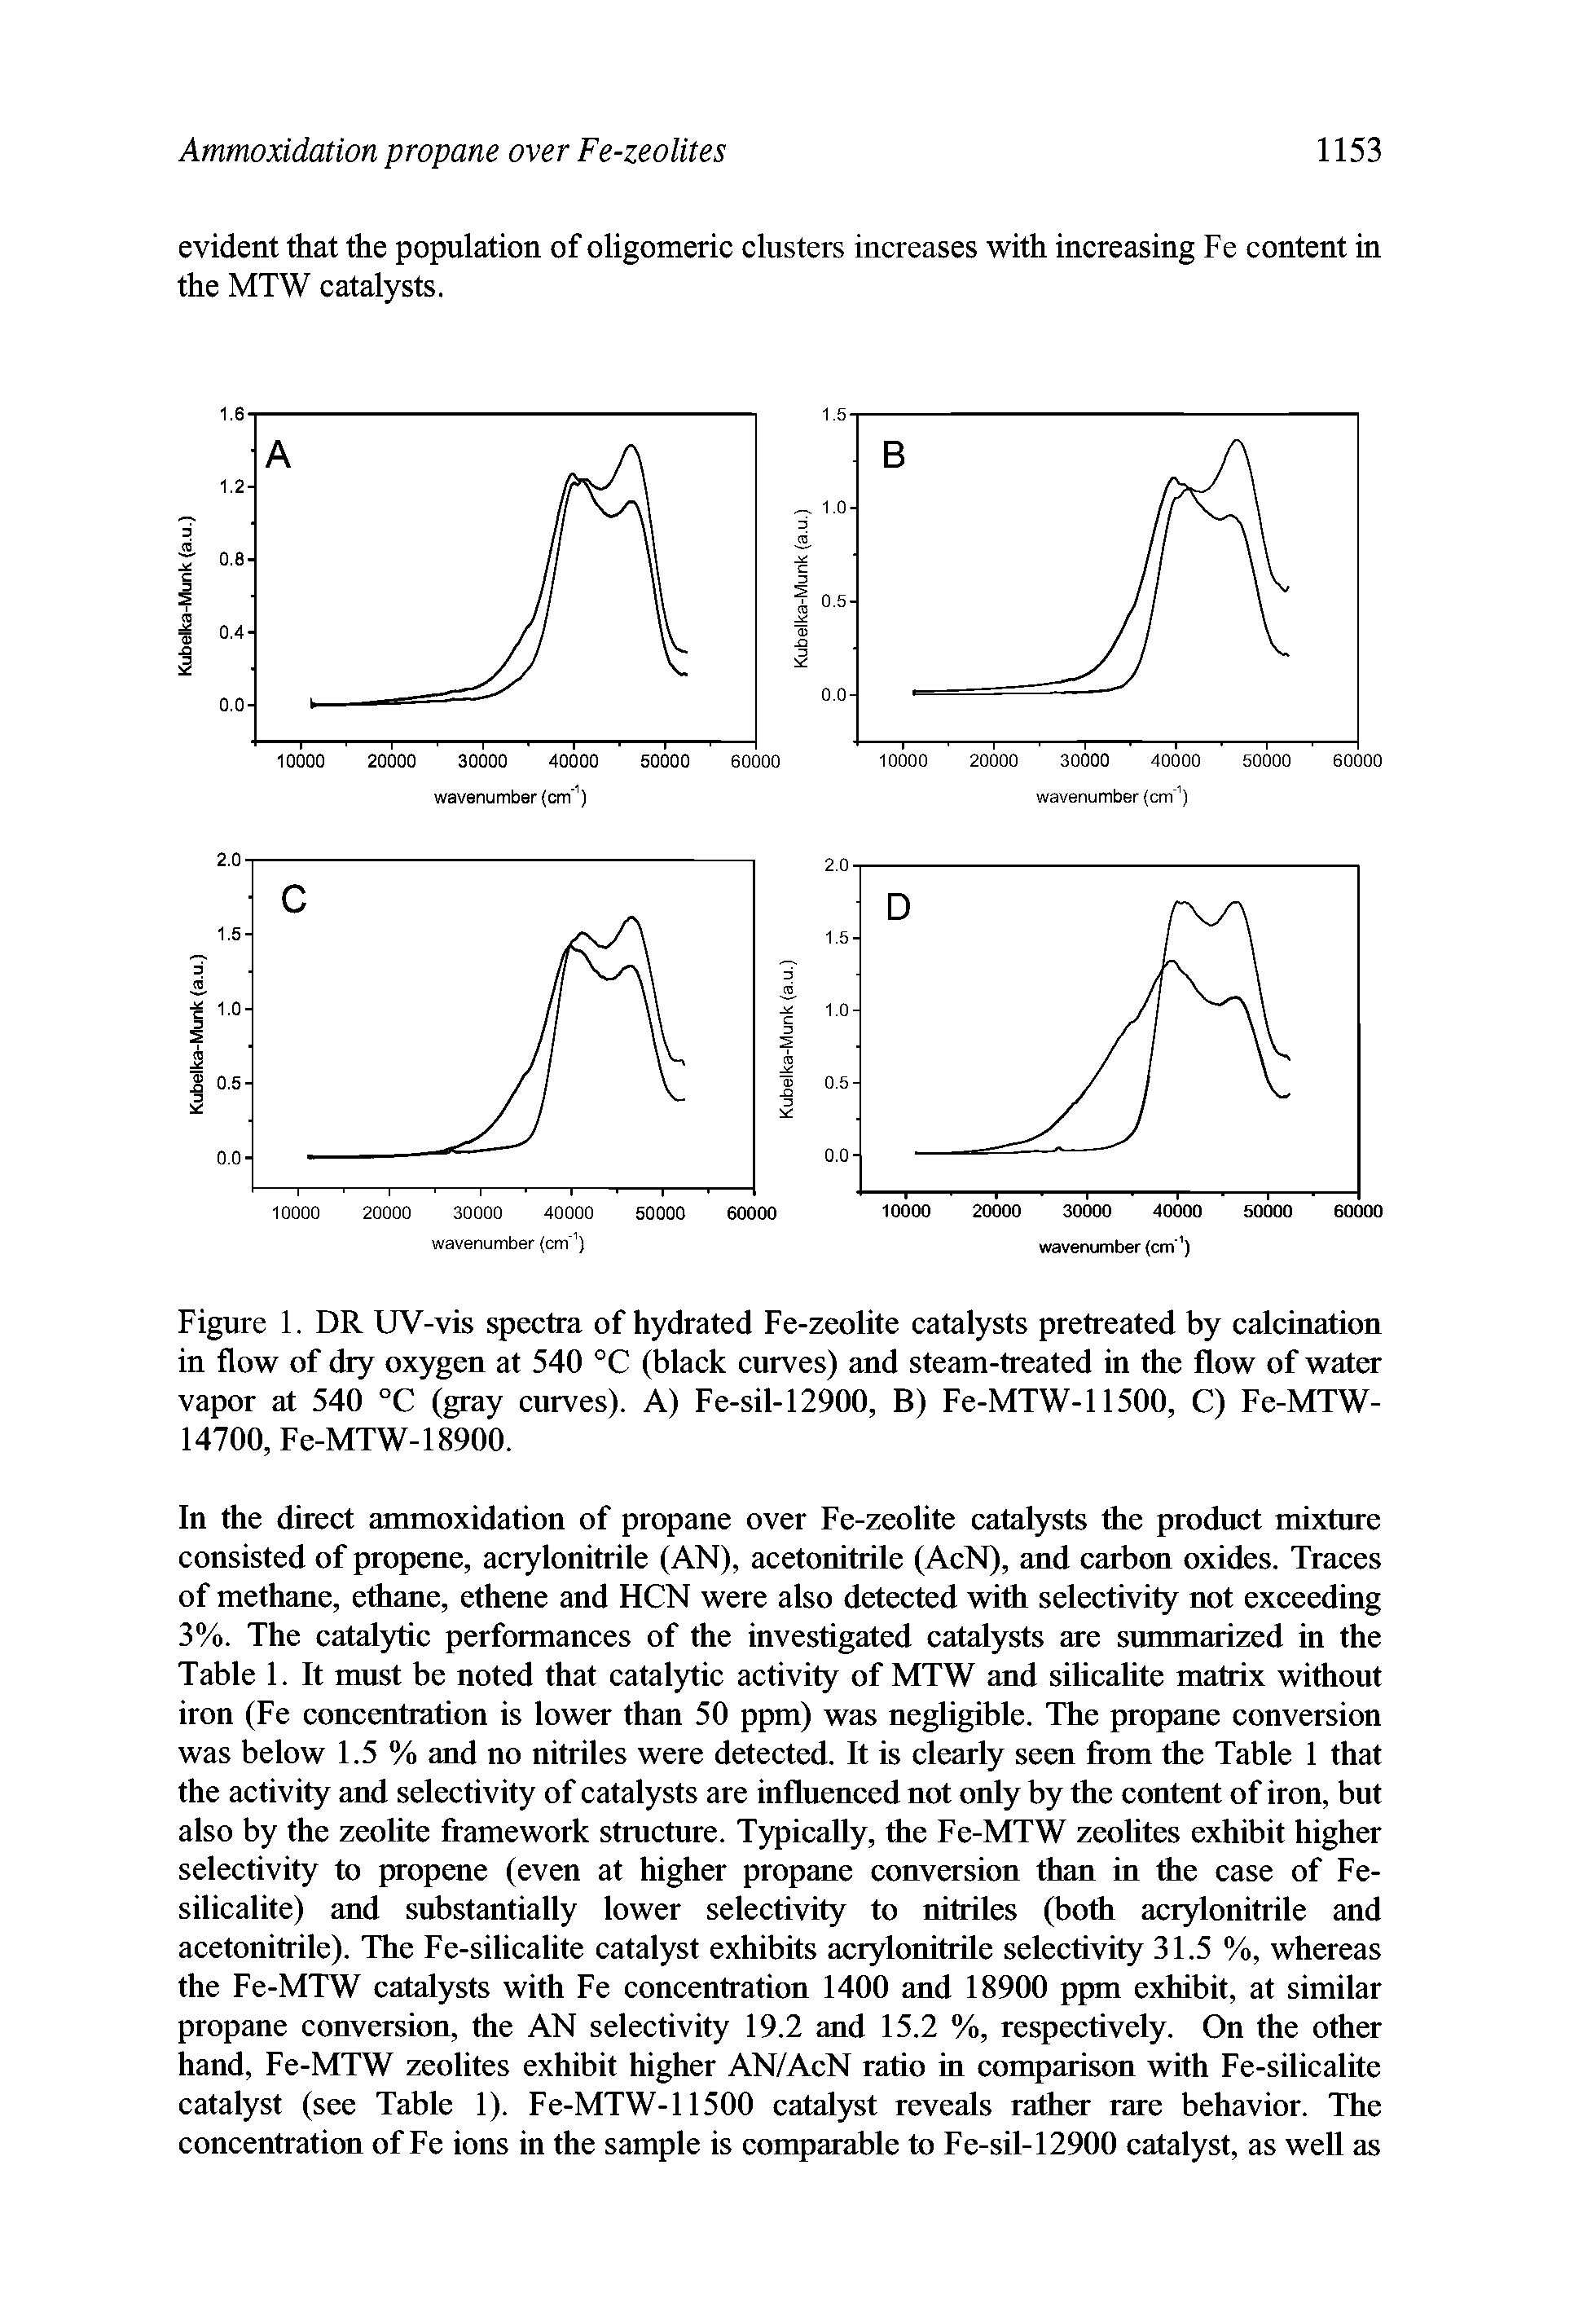 Figure 1. DR UV-vis spectra of hydrated Fe-zeolite catalysts pretreated by calcination in flow of dry oxygen at 540 °C (black curves) and steam-treated in the flow of water vapor at 540 °C (gray curves). A) Fe-sil-12900, B) Fe-MTW-11500, C) Fe-MTW-14700, Fe-MTW-18900.